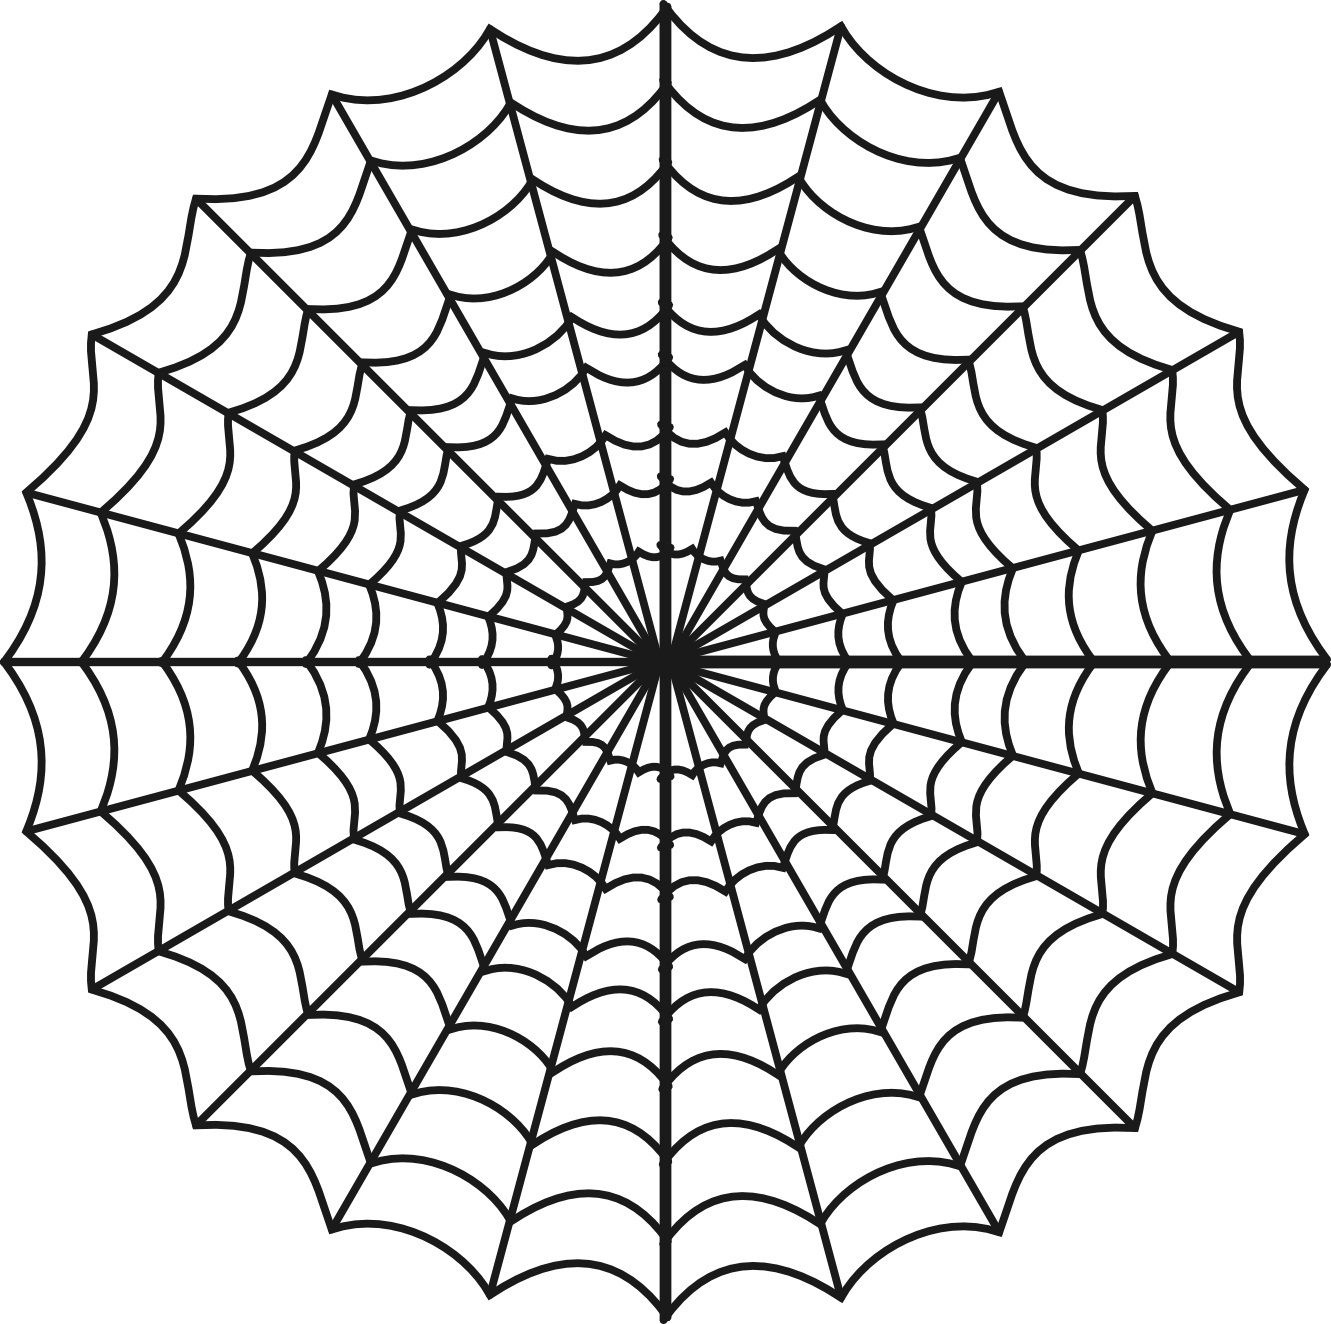 Free Printable Spider Web Coloring Pages For Kids Inside | Preschool - Free Printable Spider Web